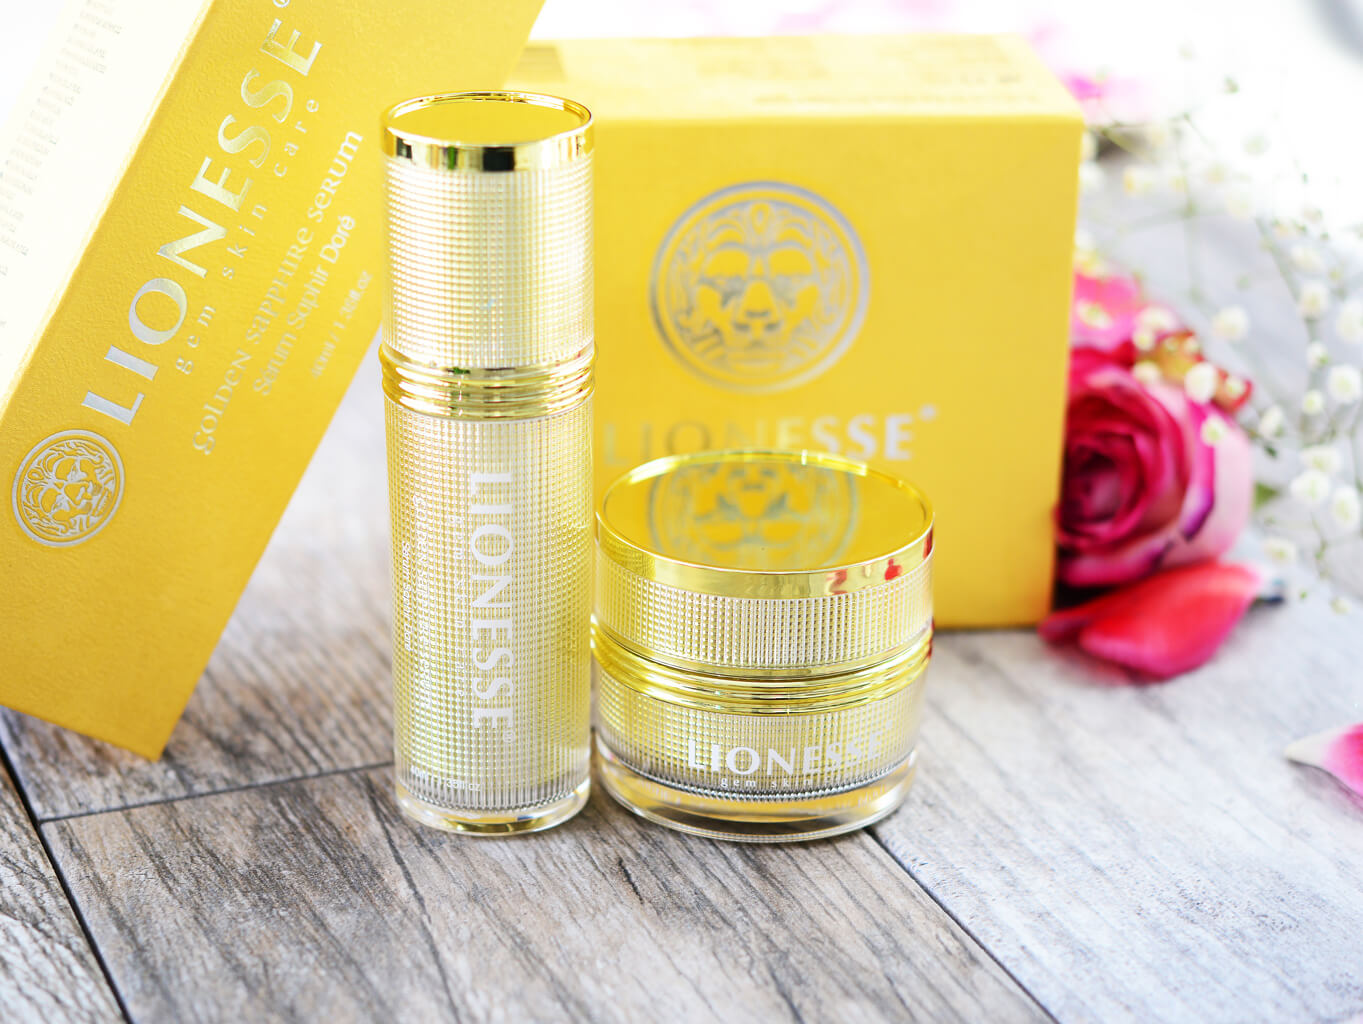 Decoding the Hype: Is Lionesse Skincare Worth it?